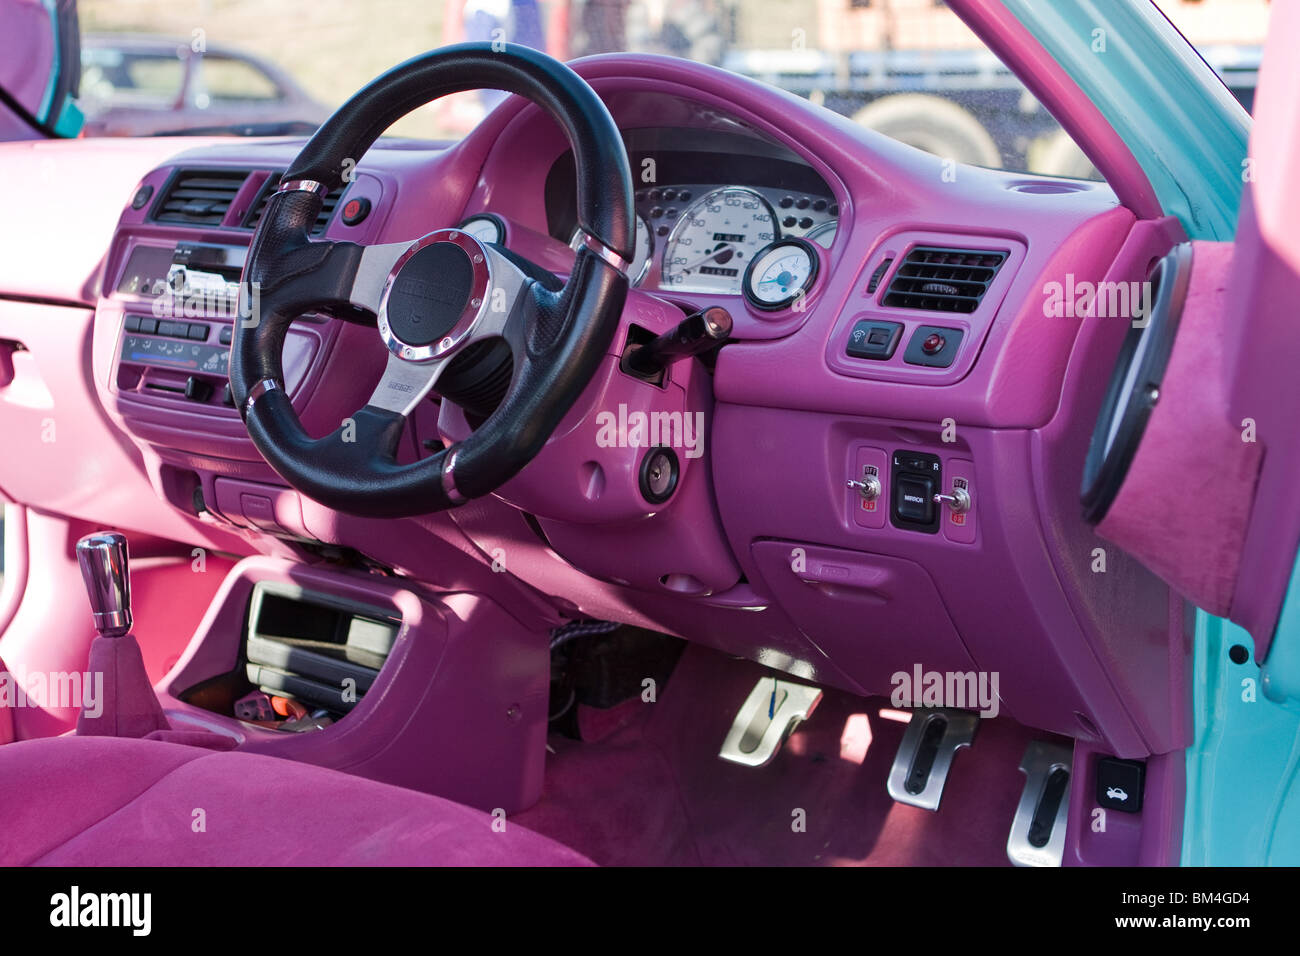 Custom Car Interior High Resolution Stock Photography and Images - Alamy